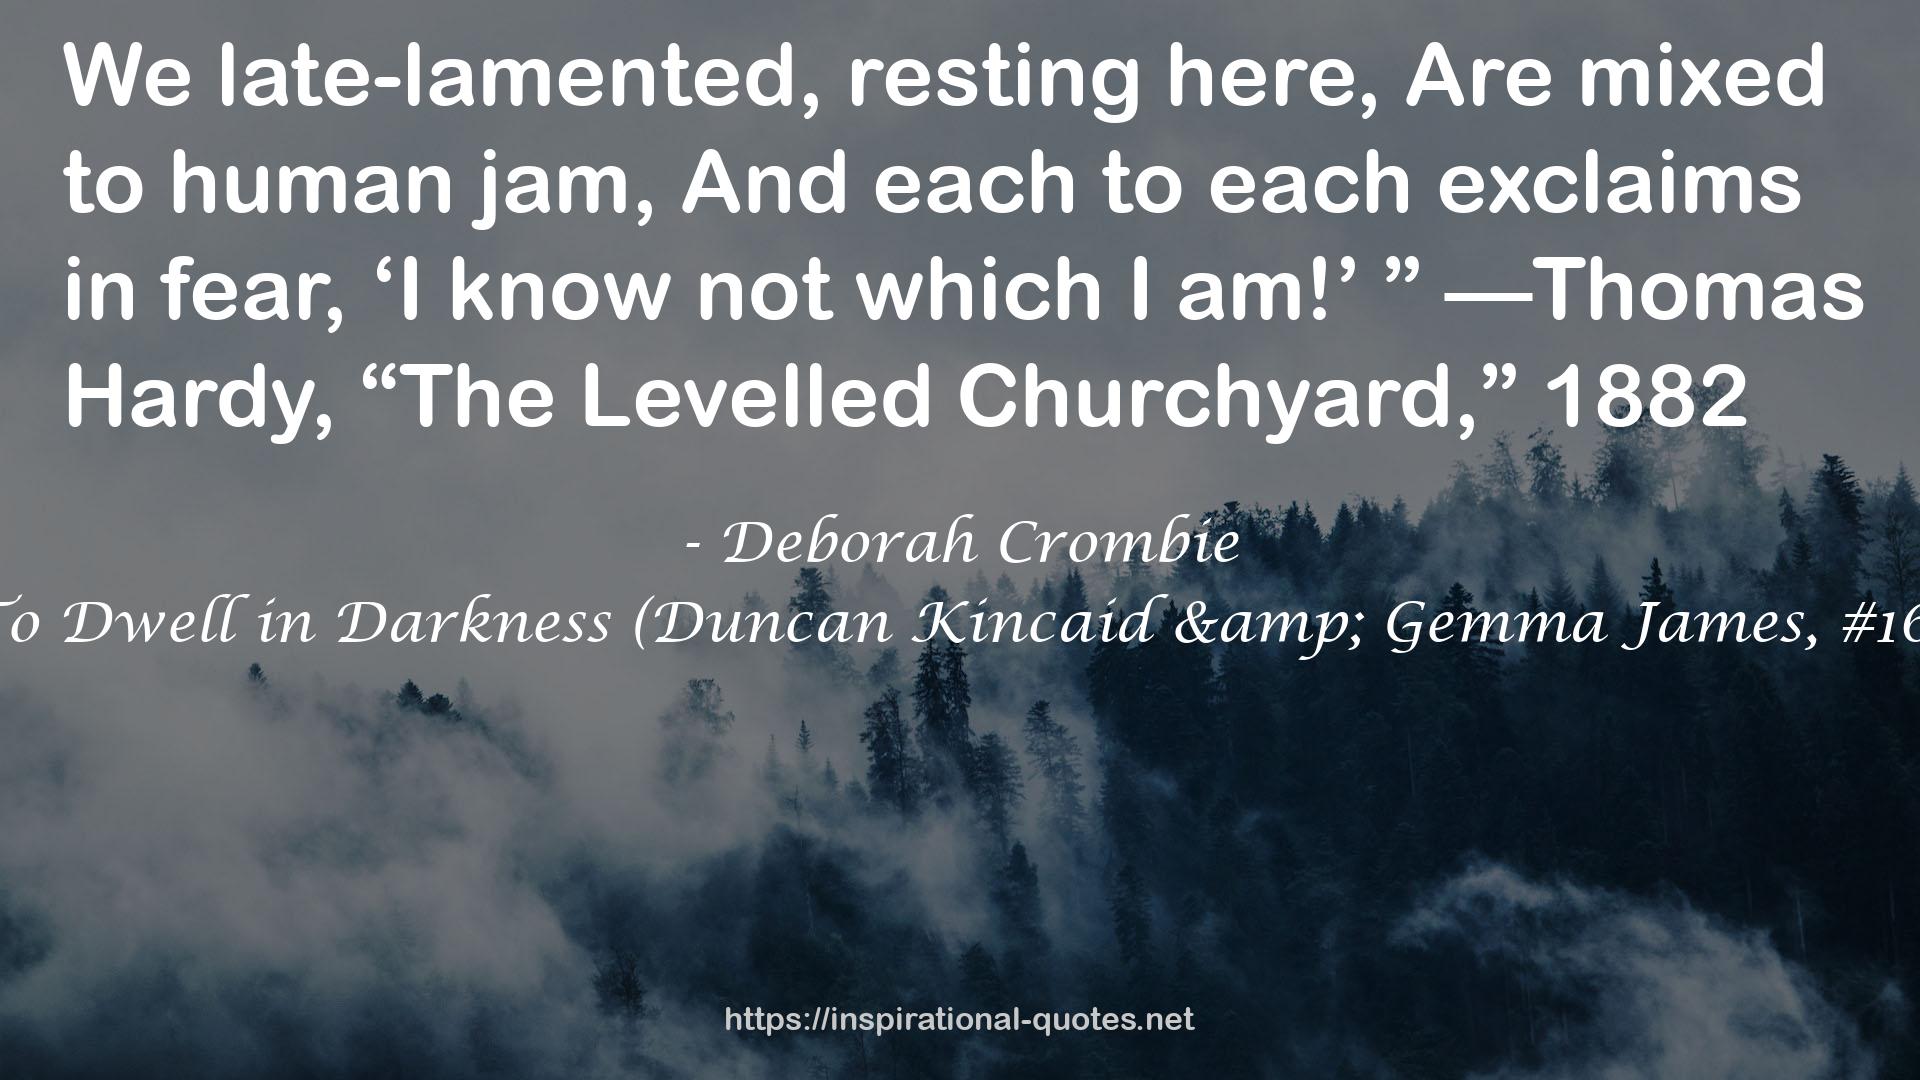 To Dwell in Darkness (Duncan Kincaid & Gemma James, #16) QUOTES